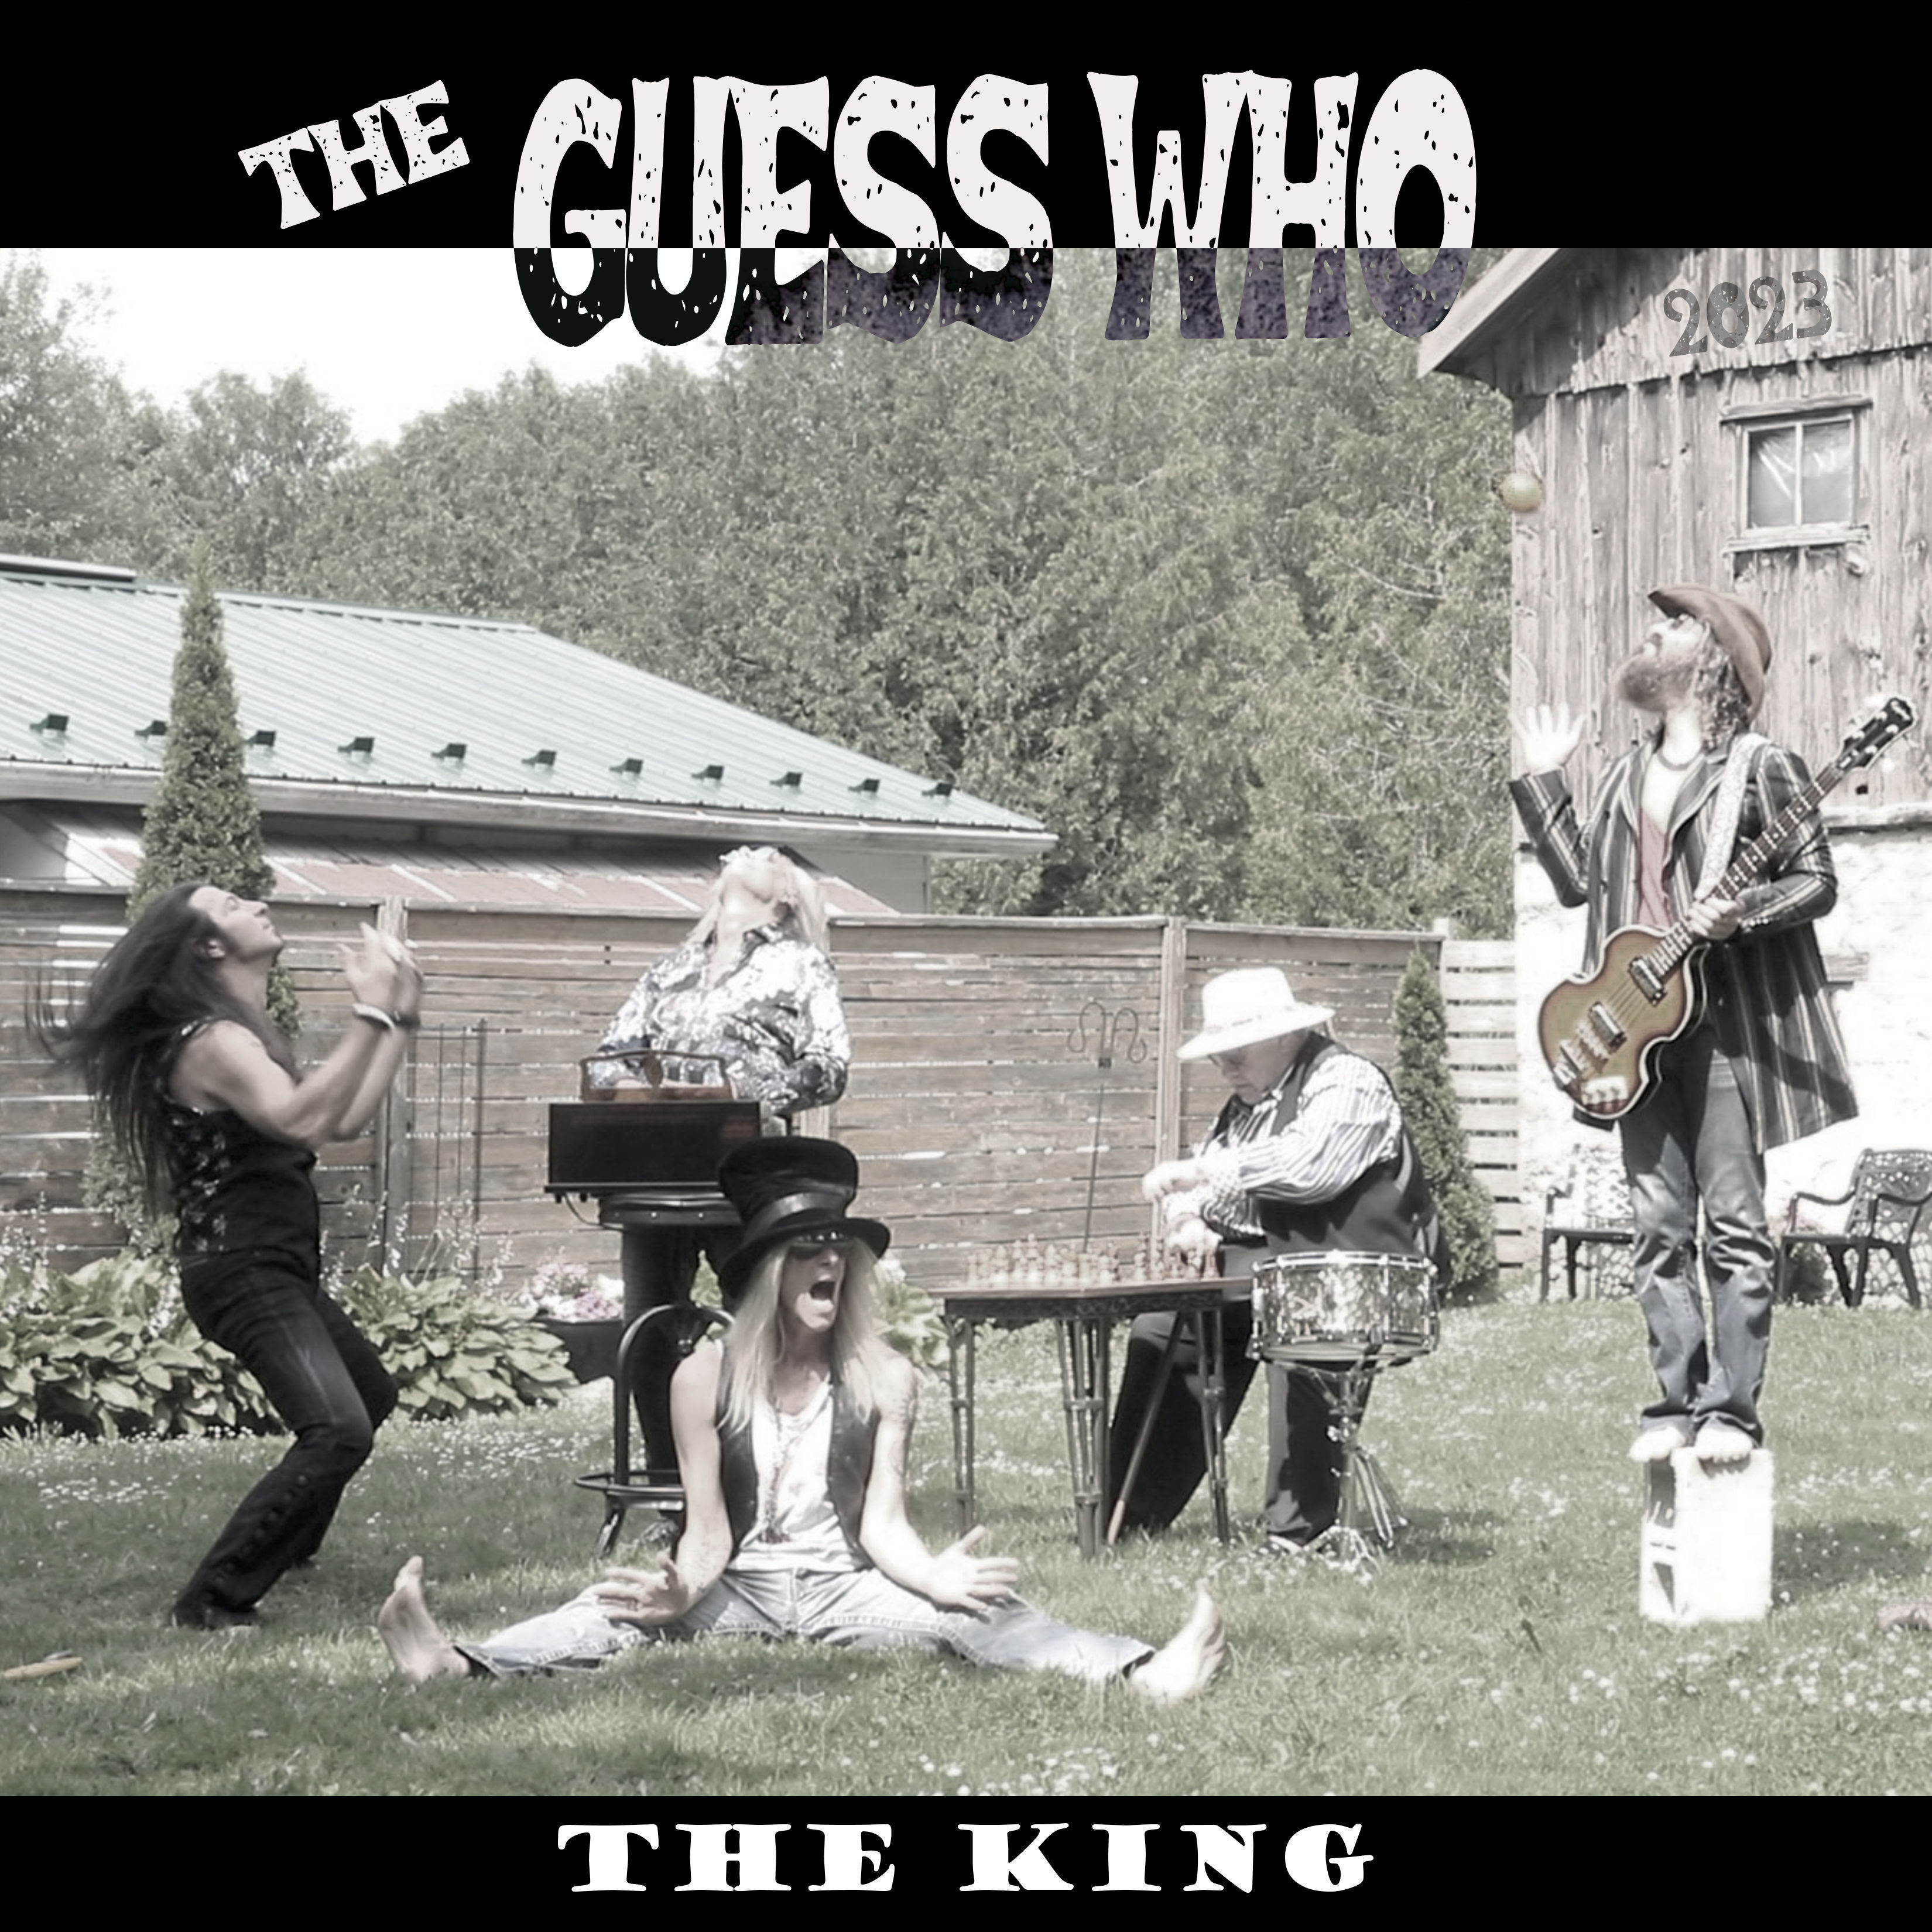 LEGENDARY CANADIAN BAND THE GUESS WHO IS SET TO RELEASE ITS NEW STUDIO ALBUM, PLEIN D‘AMOUR